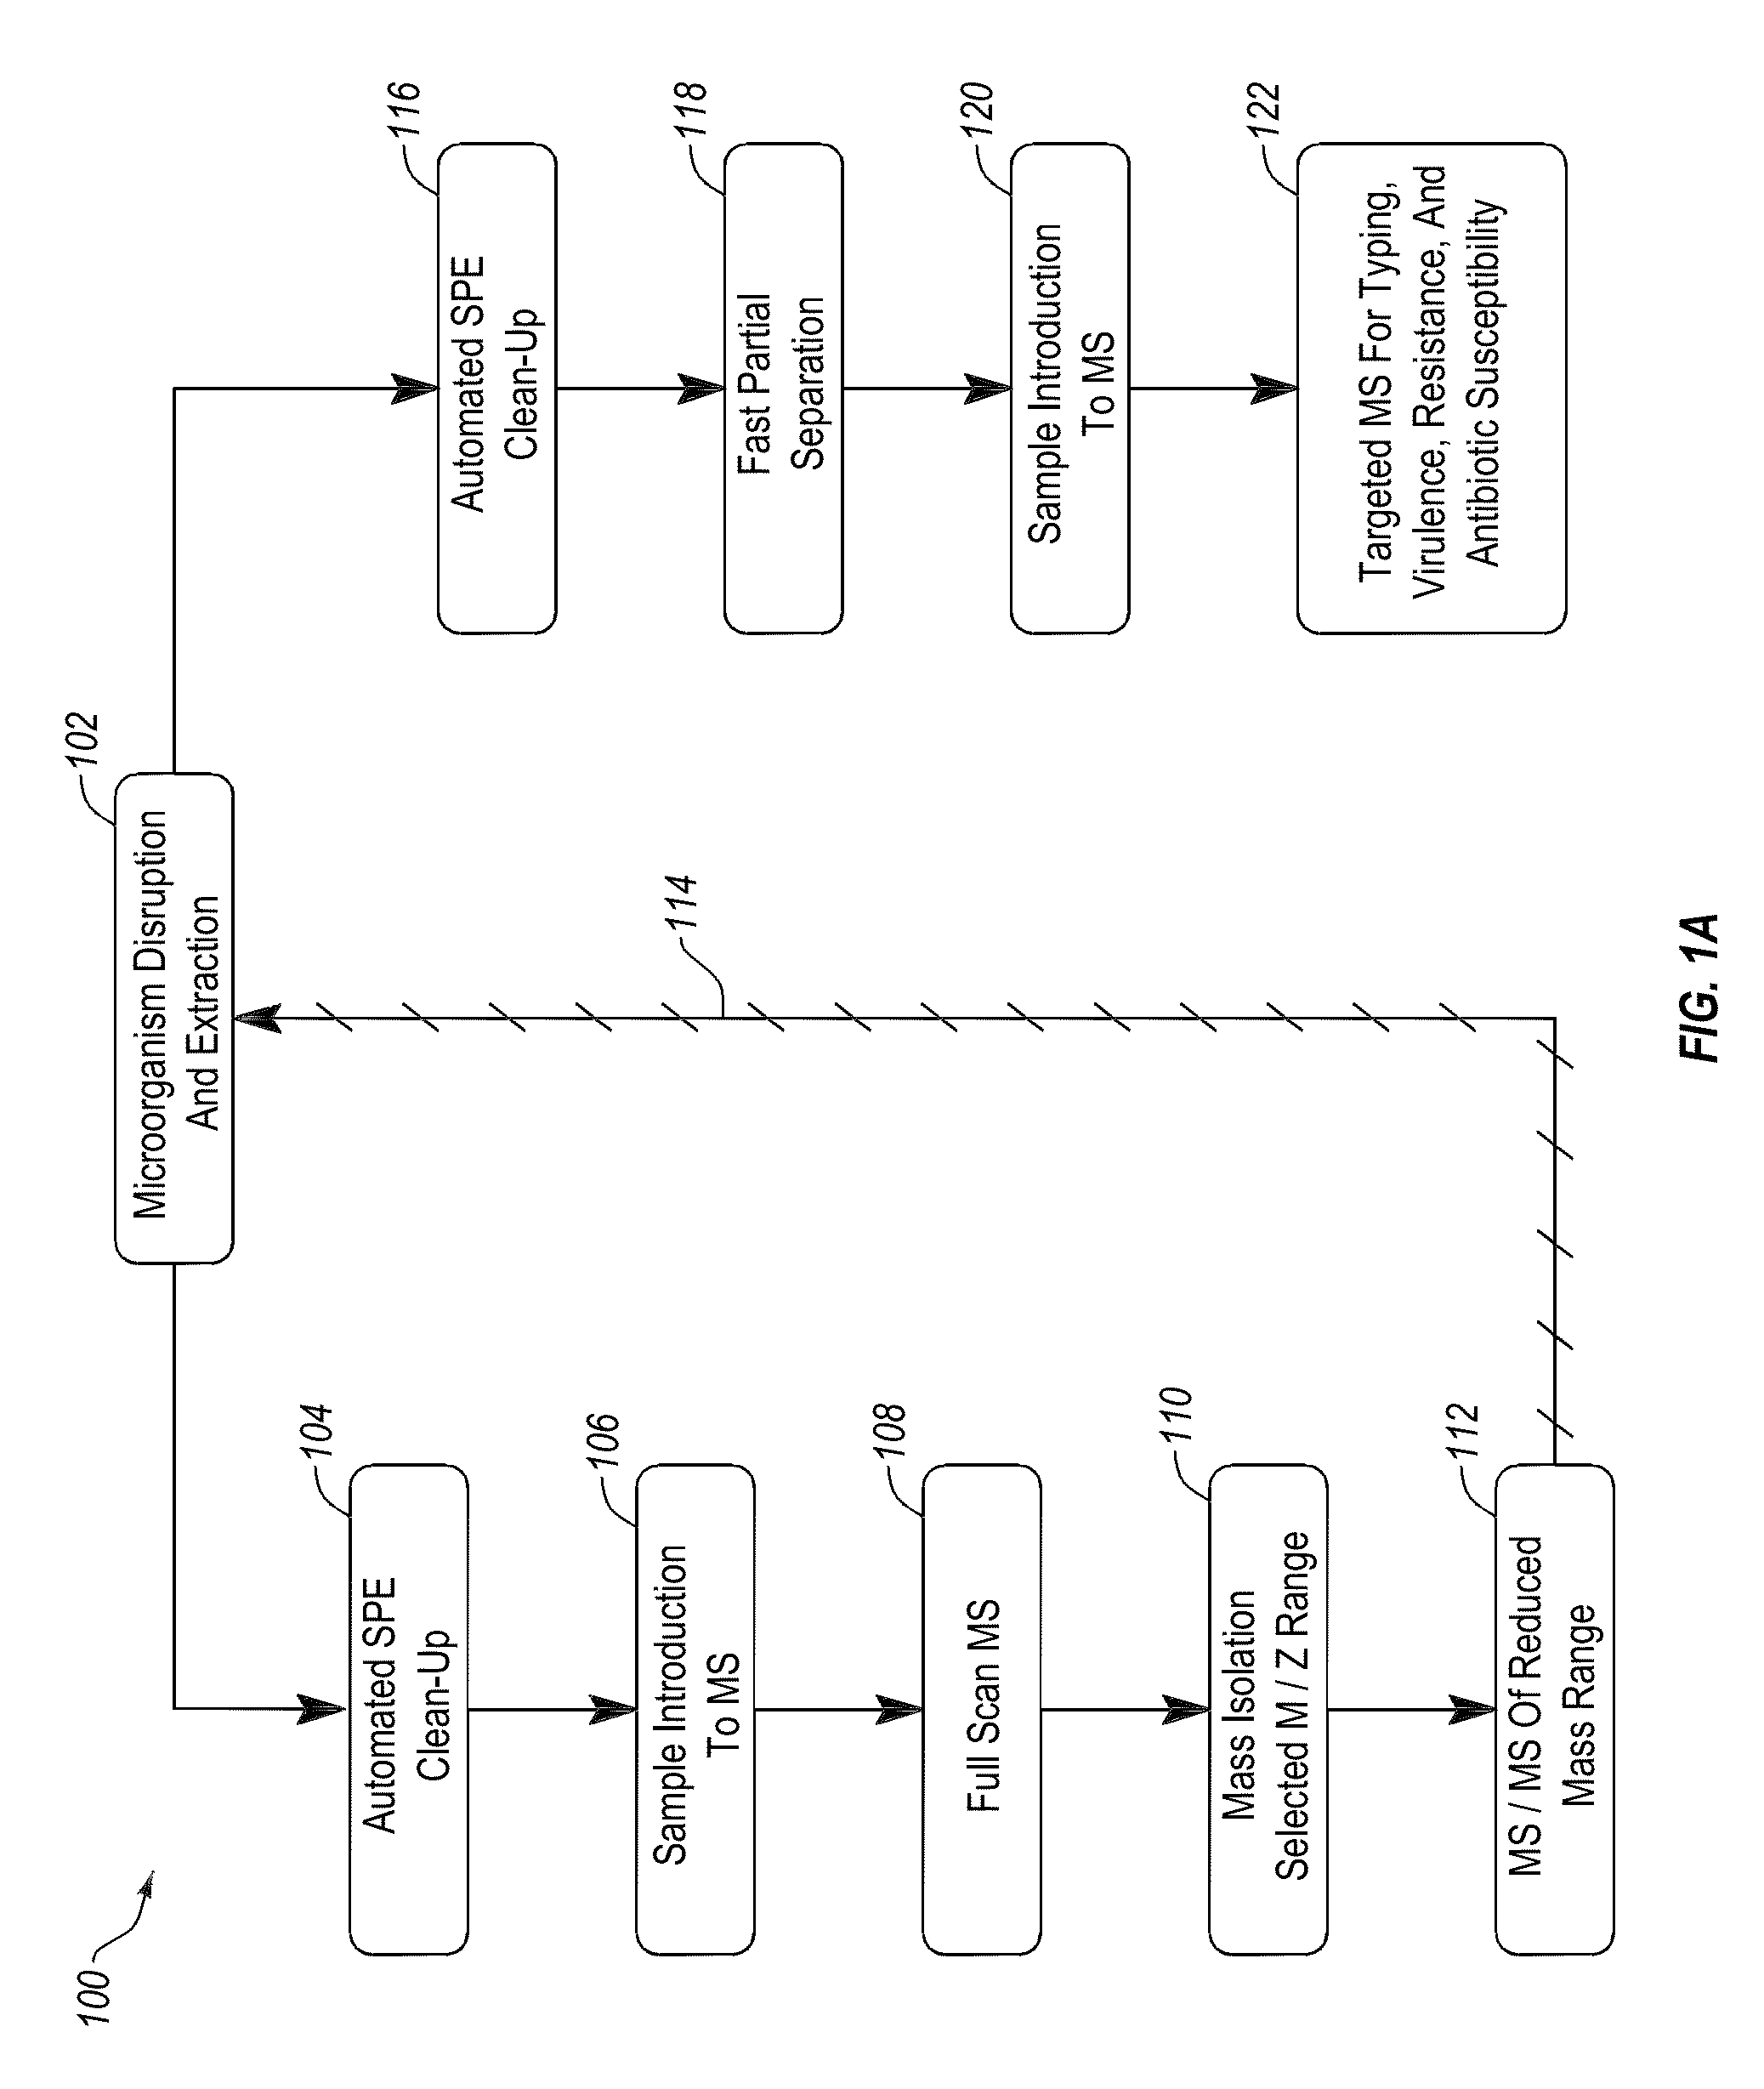 Apparatus and methods for microbial identification by mass spectrometry